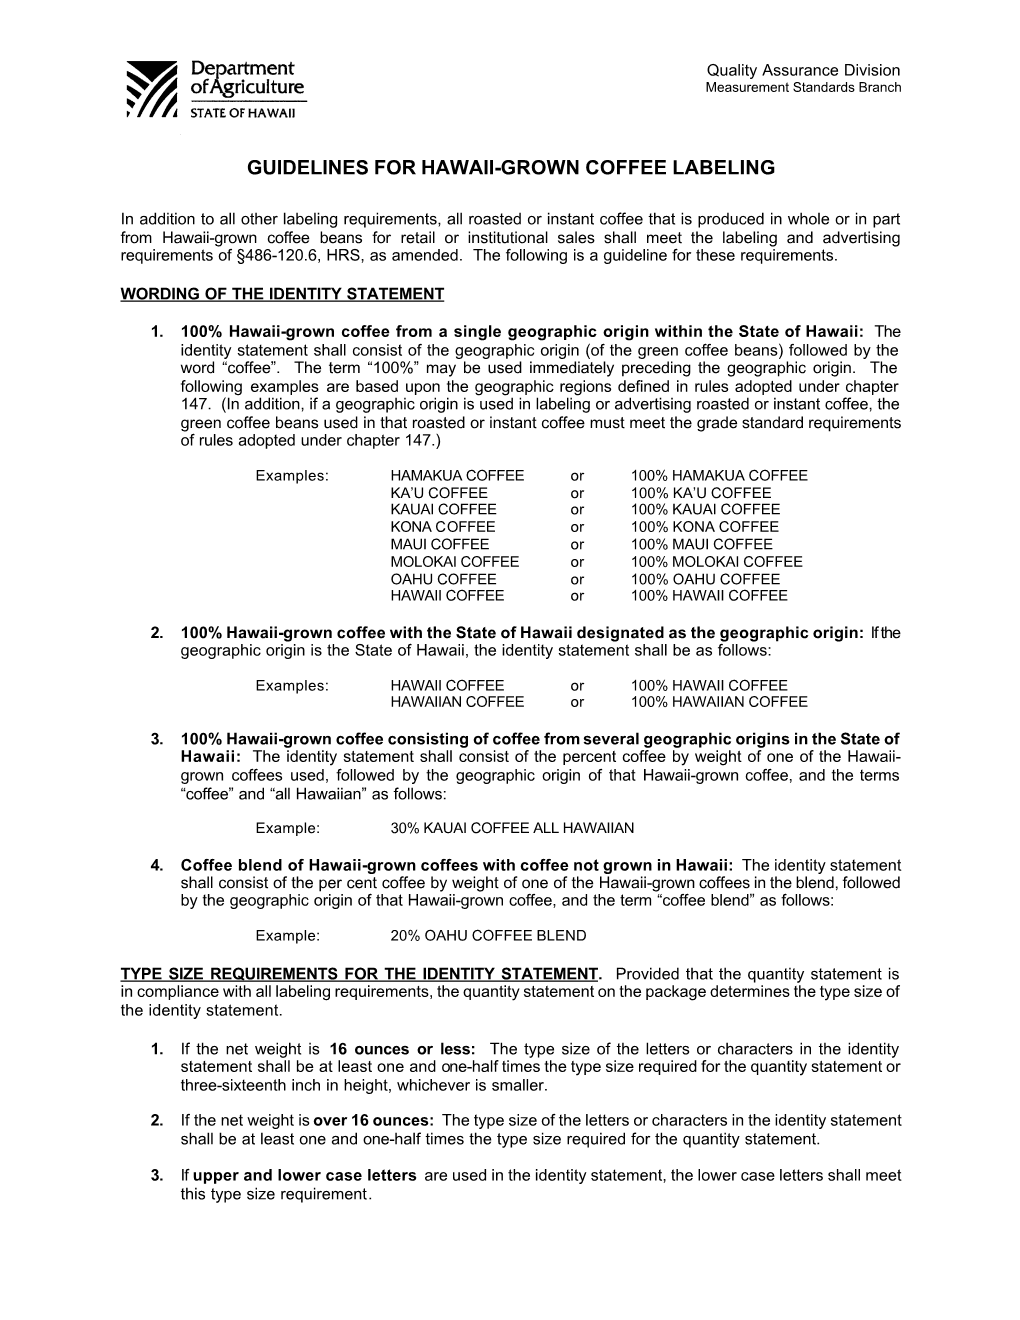 Hawaii-Grown Coffee Labeling Requirements